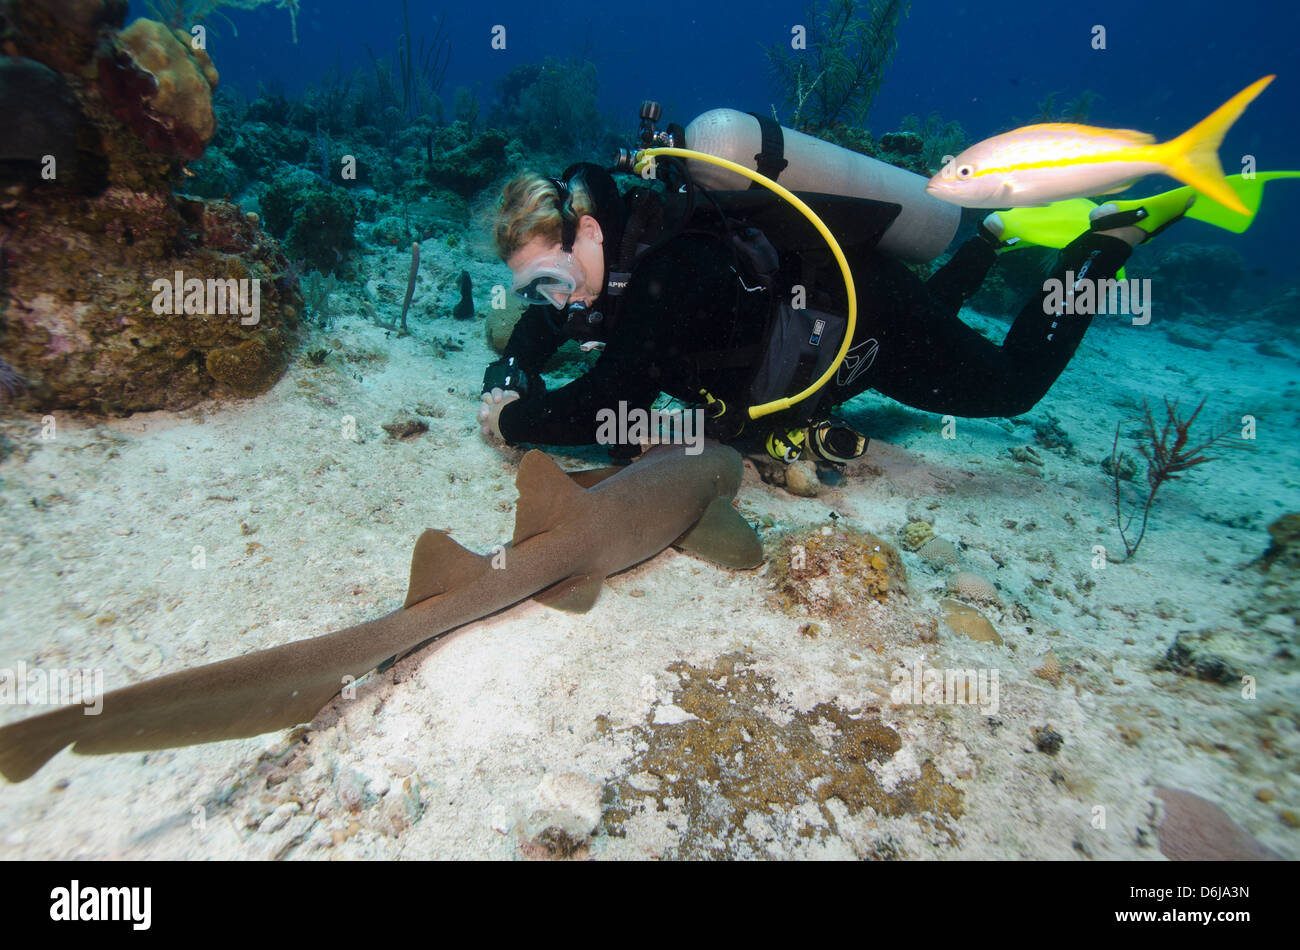 Nurse shark resting near a diver in the Turks and Caicos, West Indies, Caribbean, Central America Stock Photo